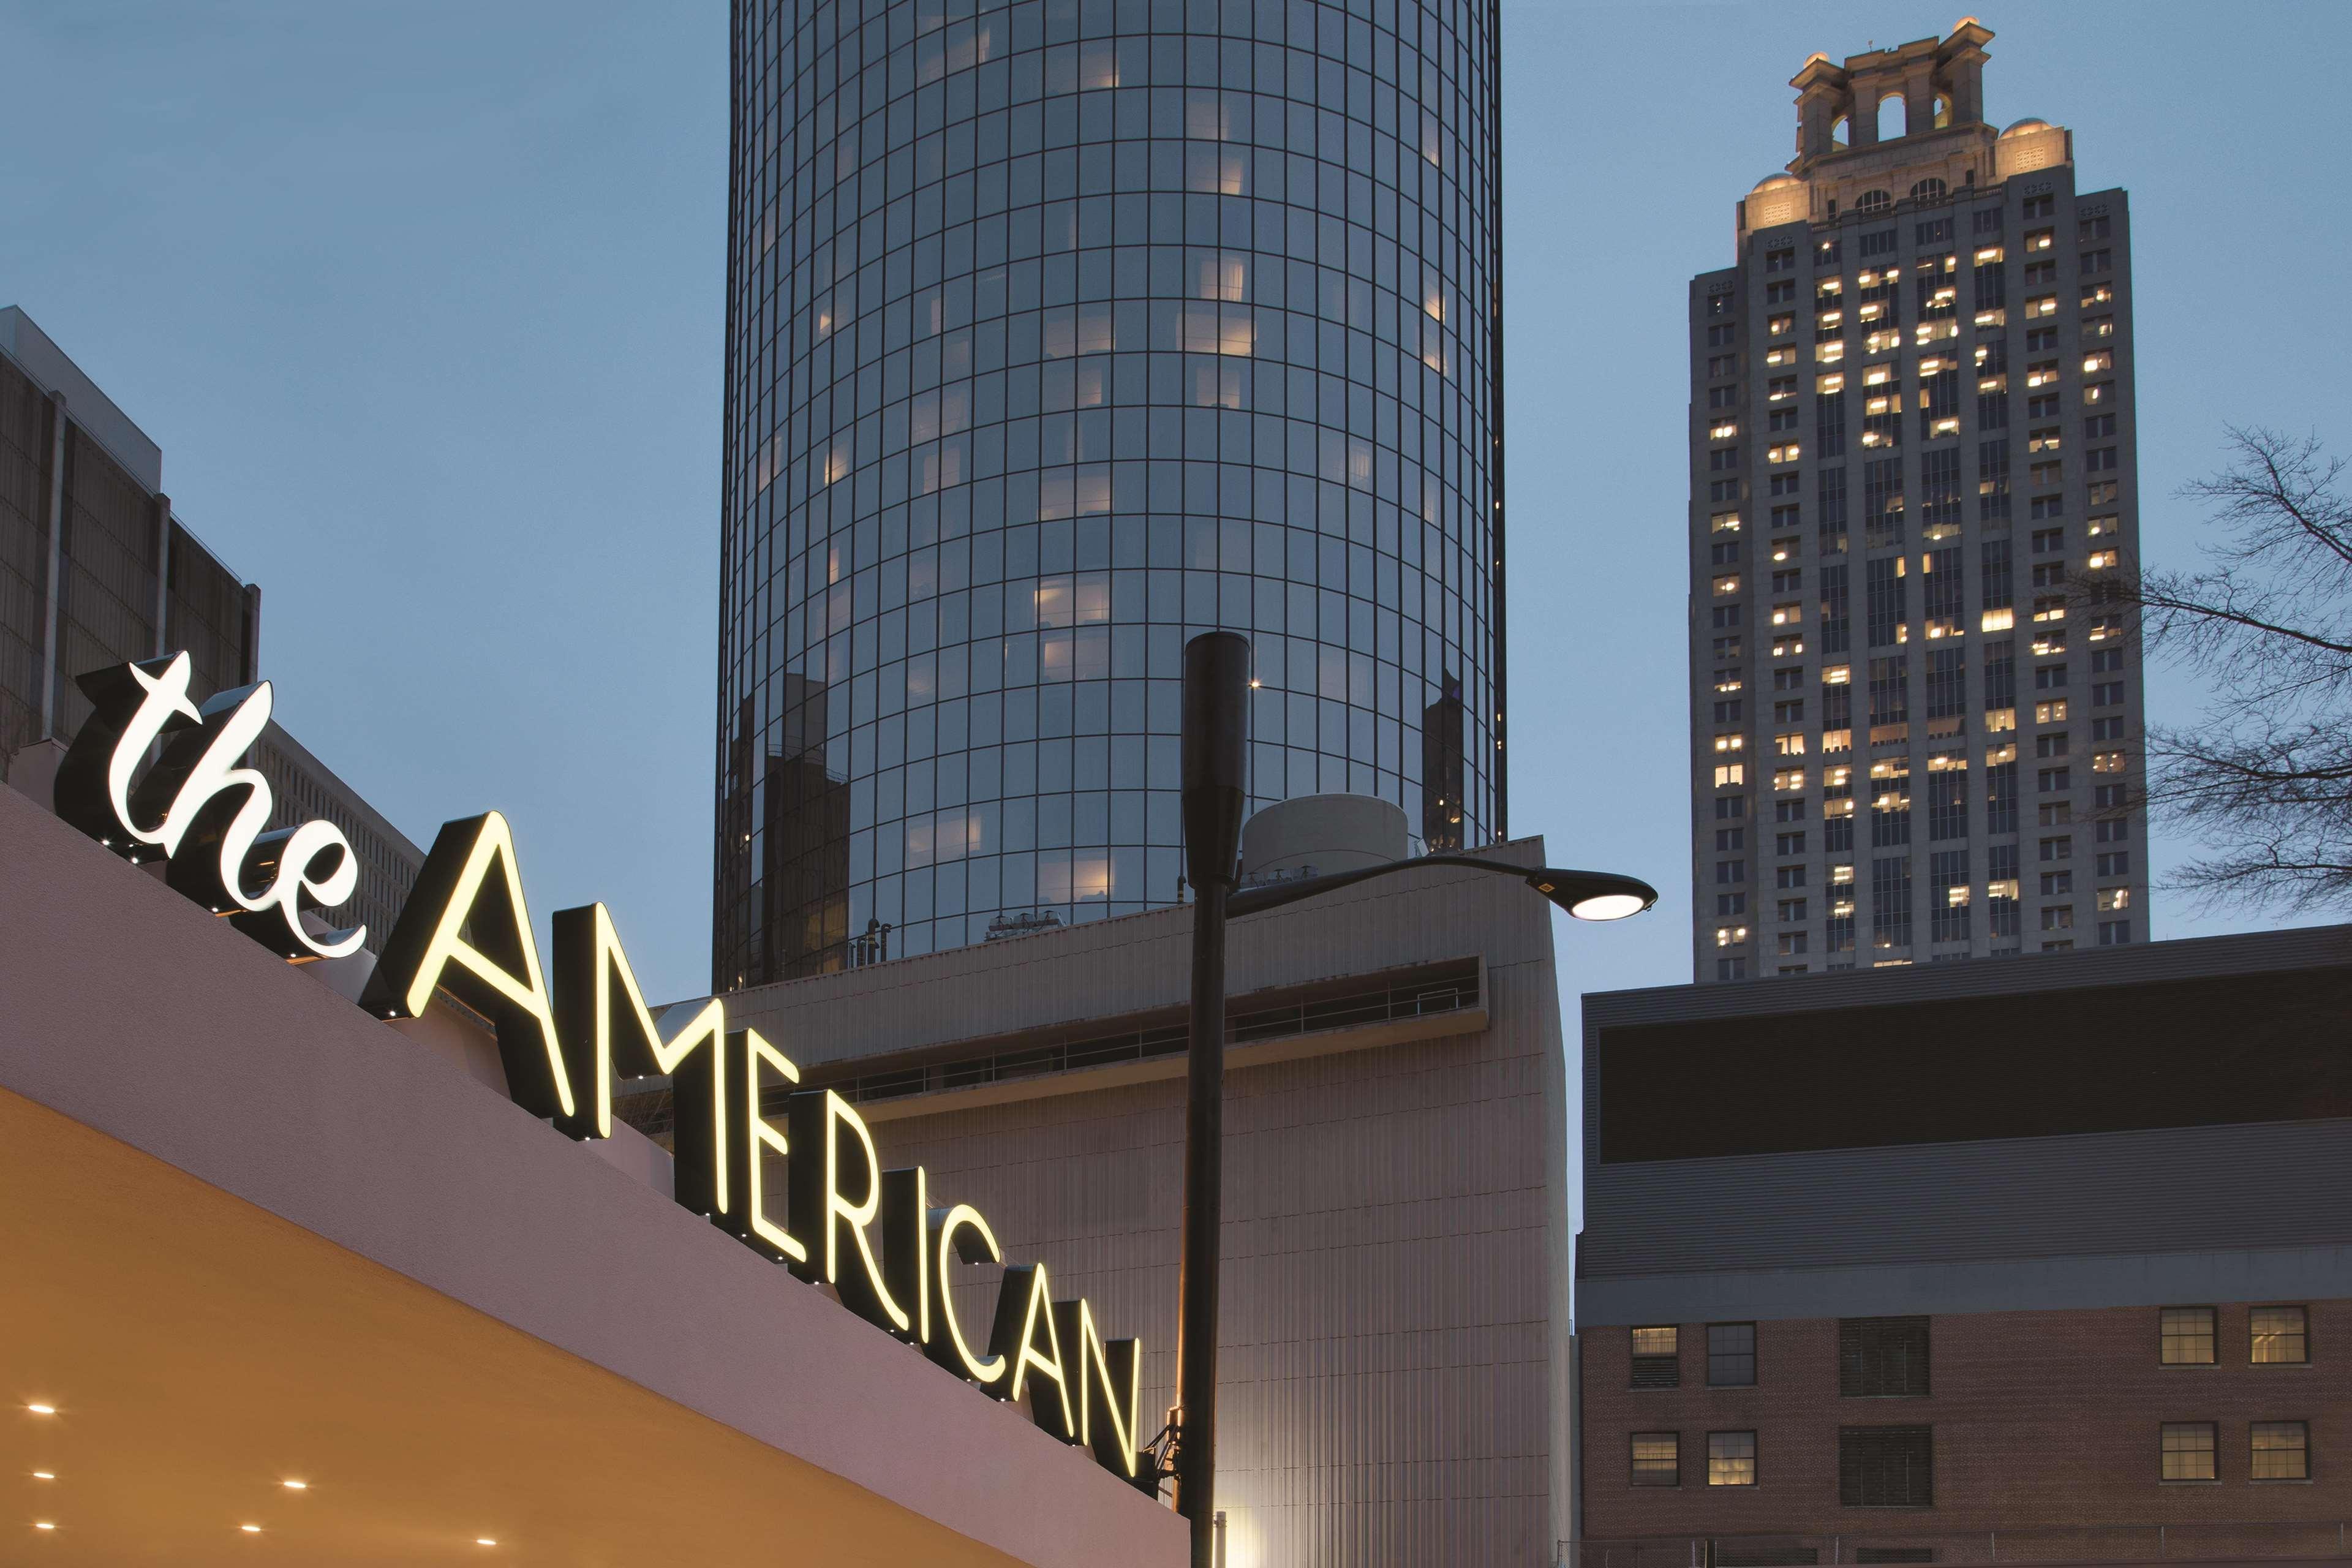 The American Hotel Atlanta Downtown-A Doubletree By Hilton Exterior photo